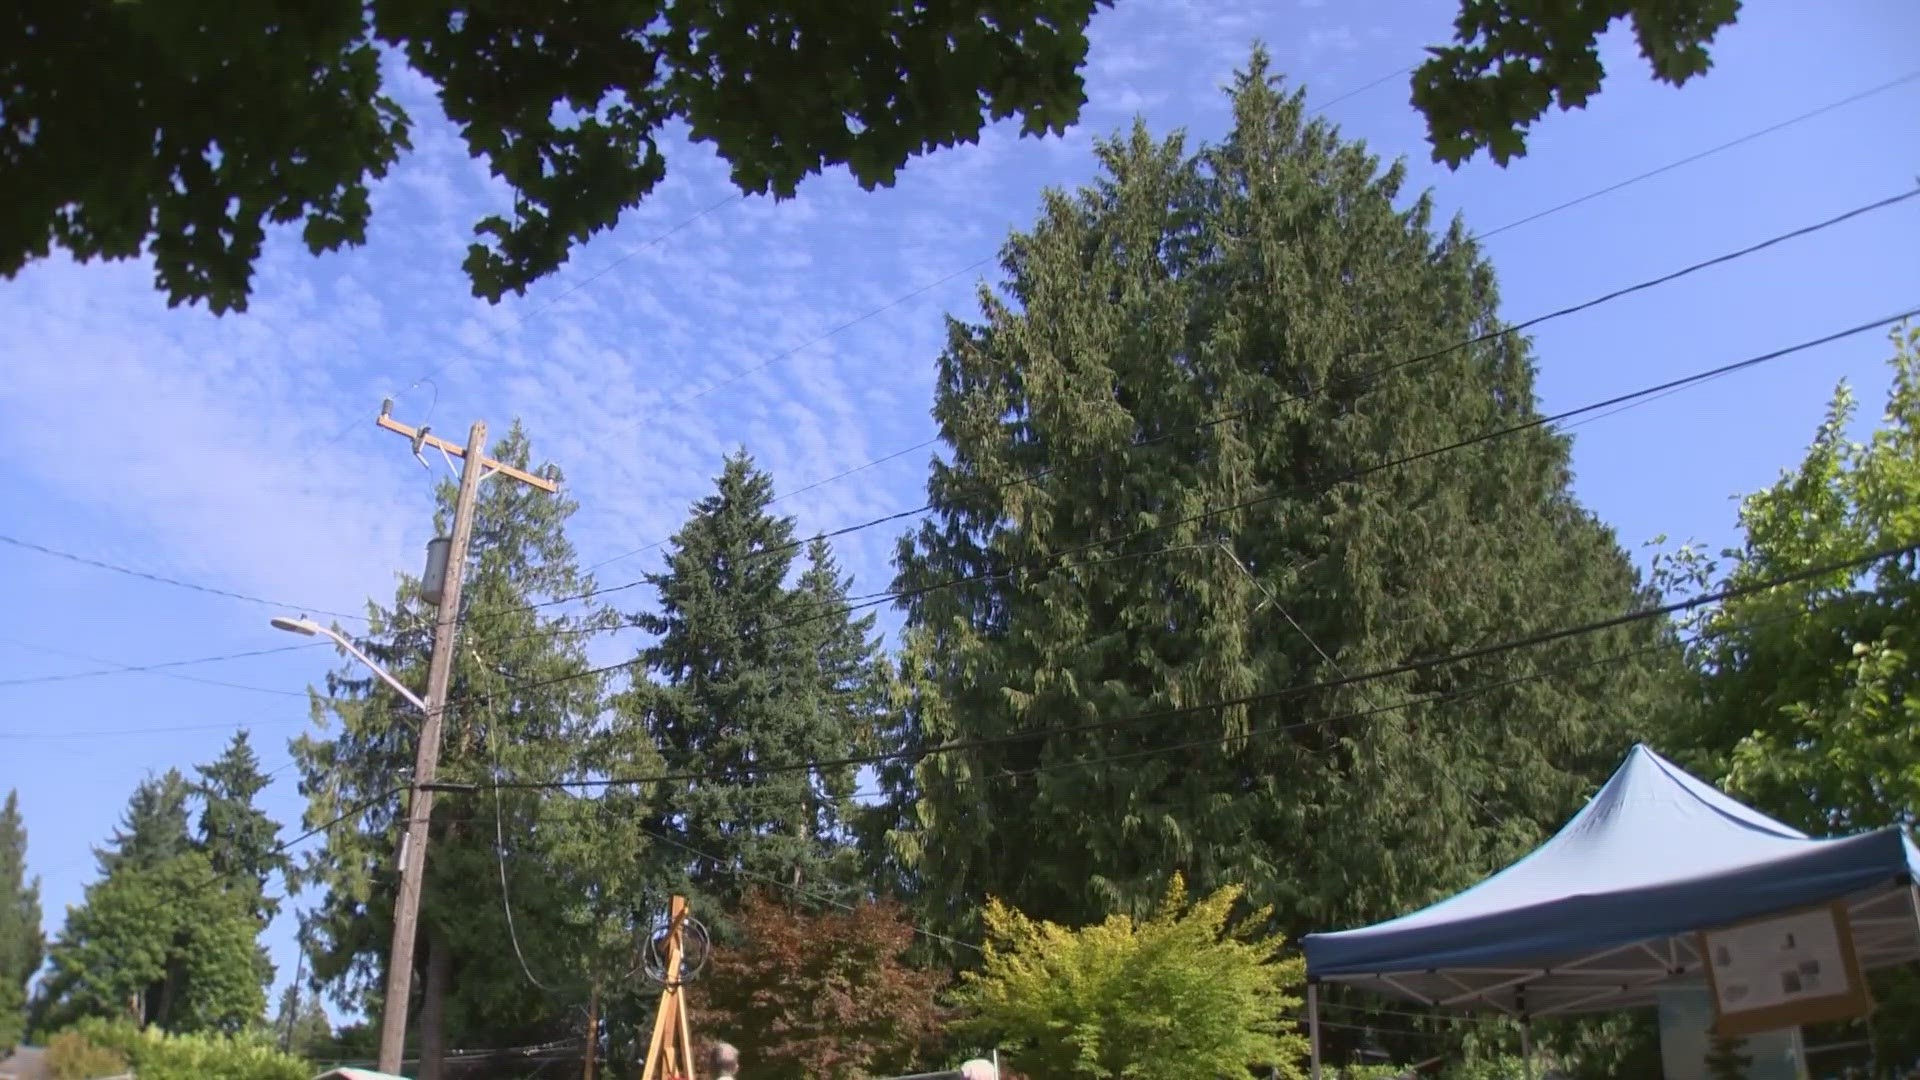 The Snoqualmie Tribe said submitted paperwork to declare the tree a Culturally Modified Tree otherwise known as a CMT.